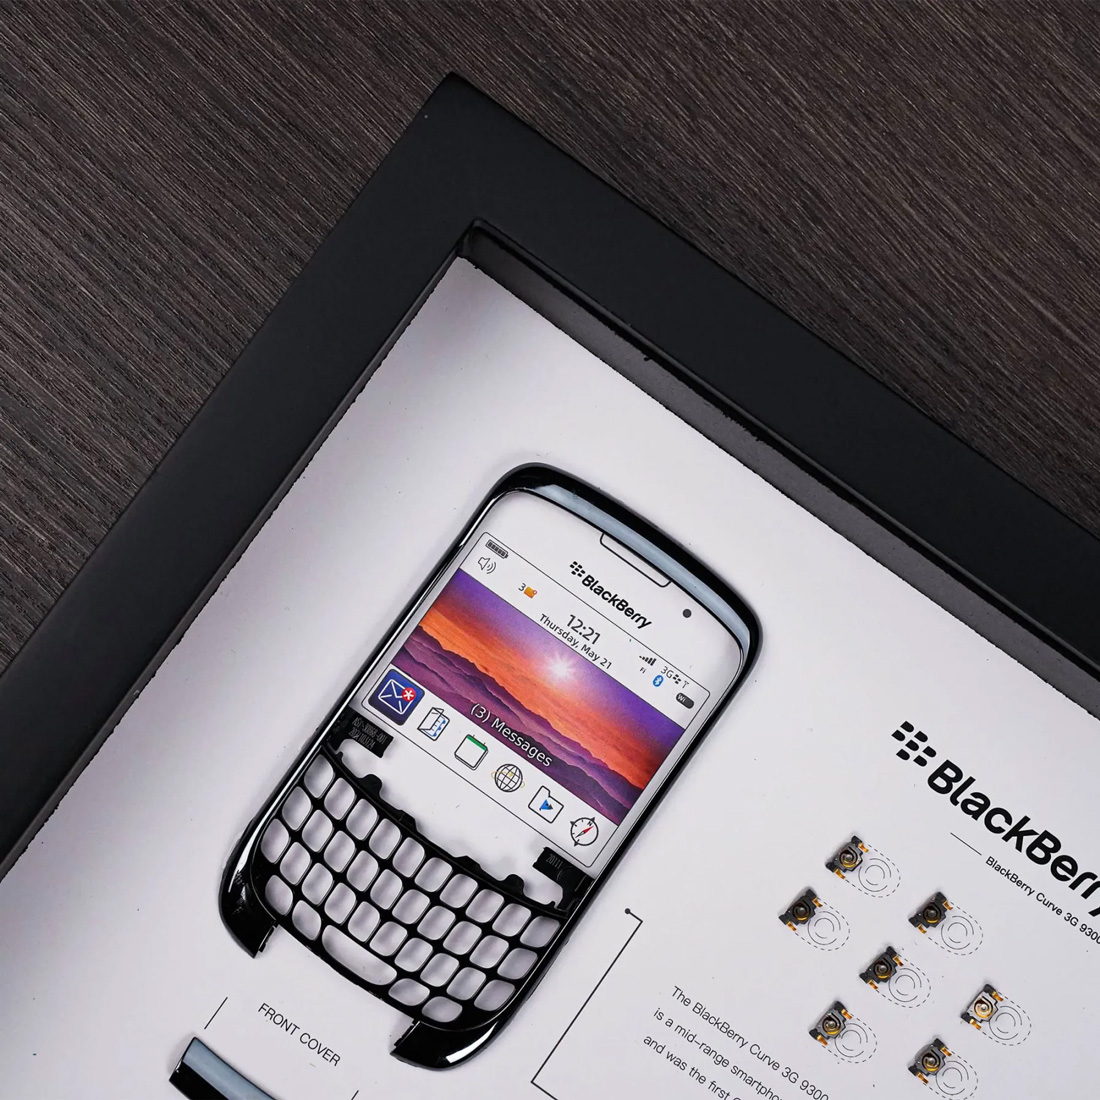 BlackBerry Curve parts in a frame